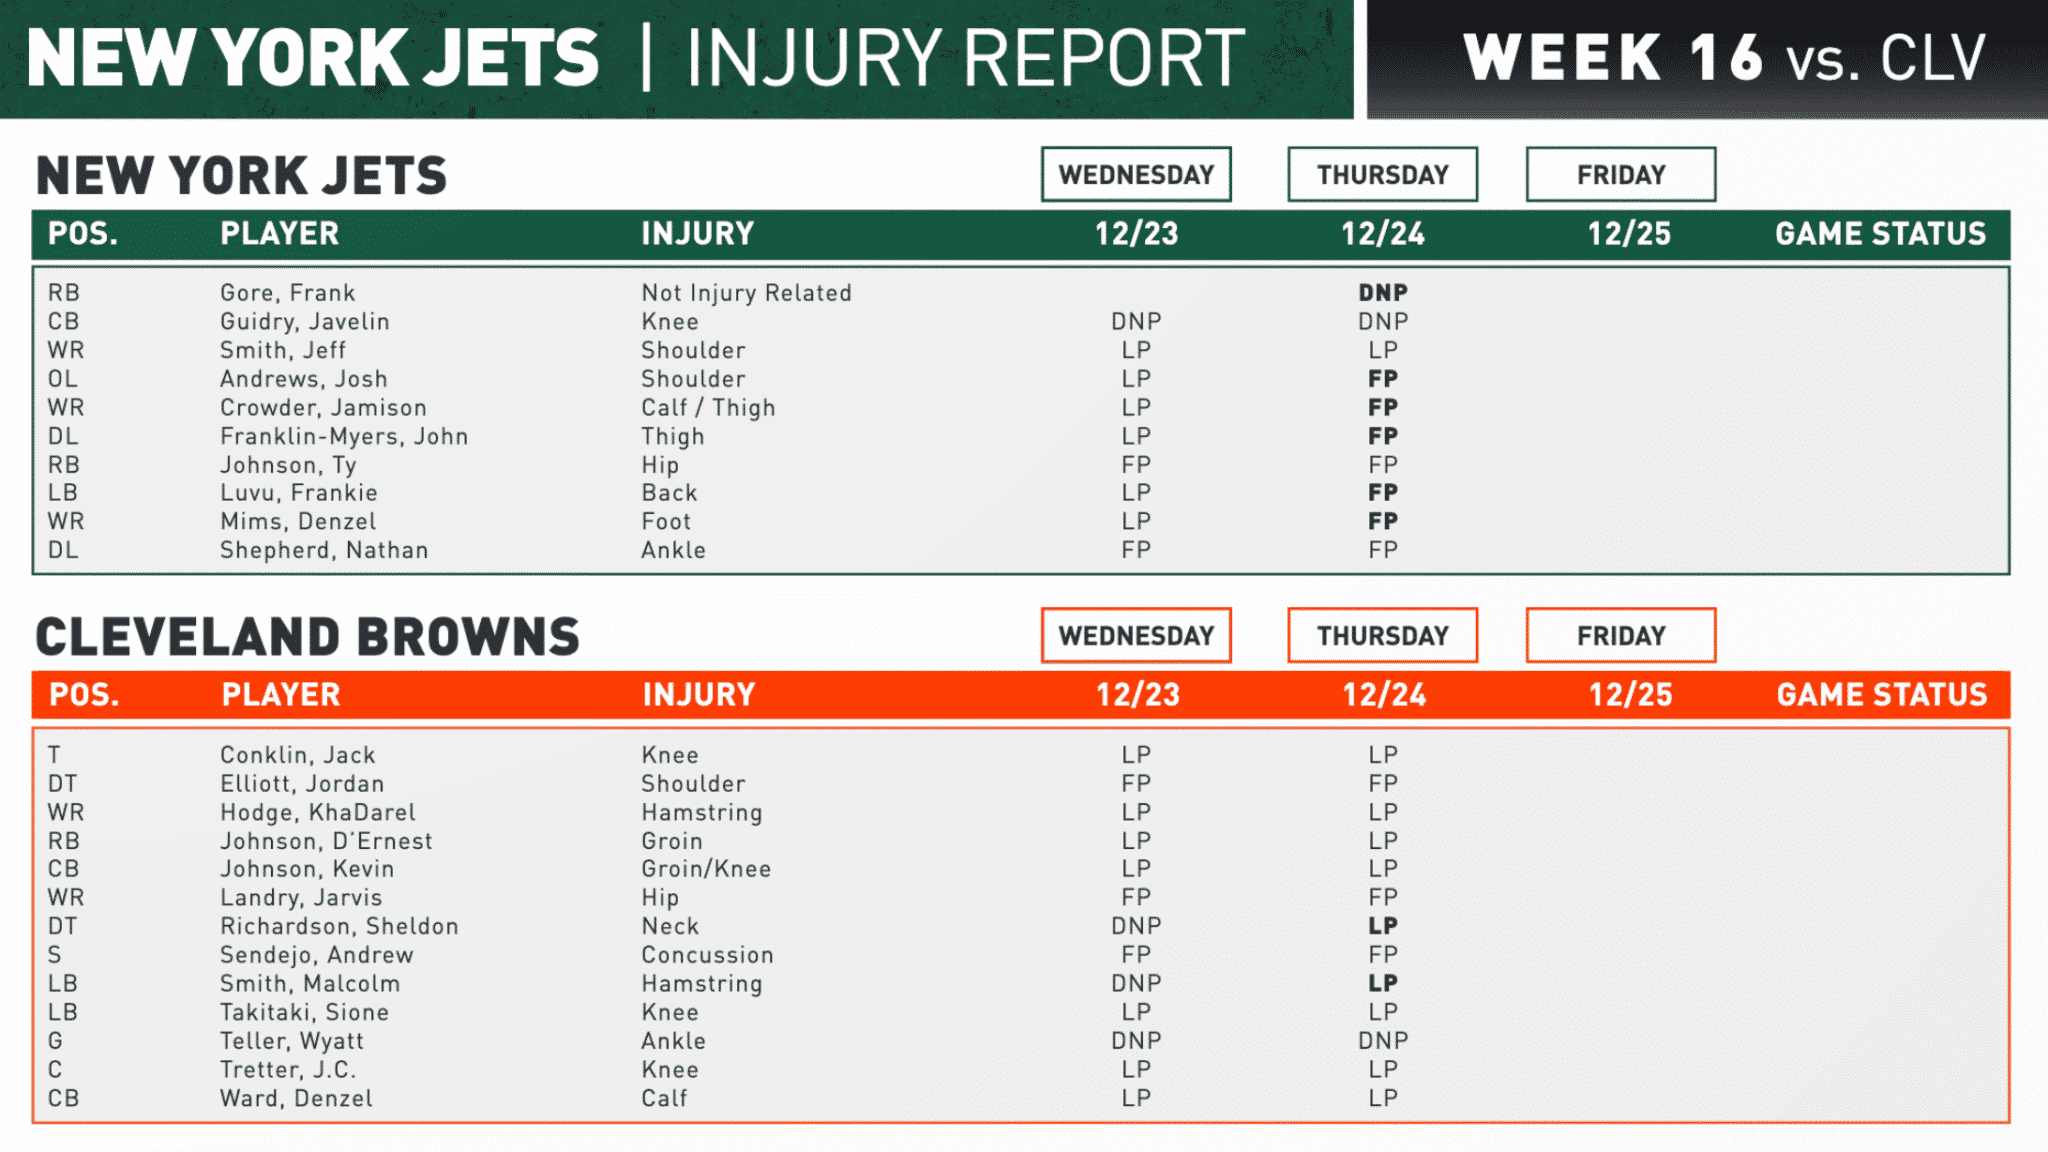 New York Jets, Cleveland Browns, Injury Report Week 16